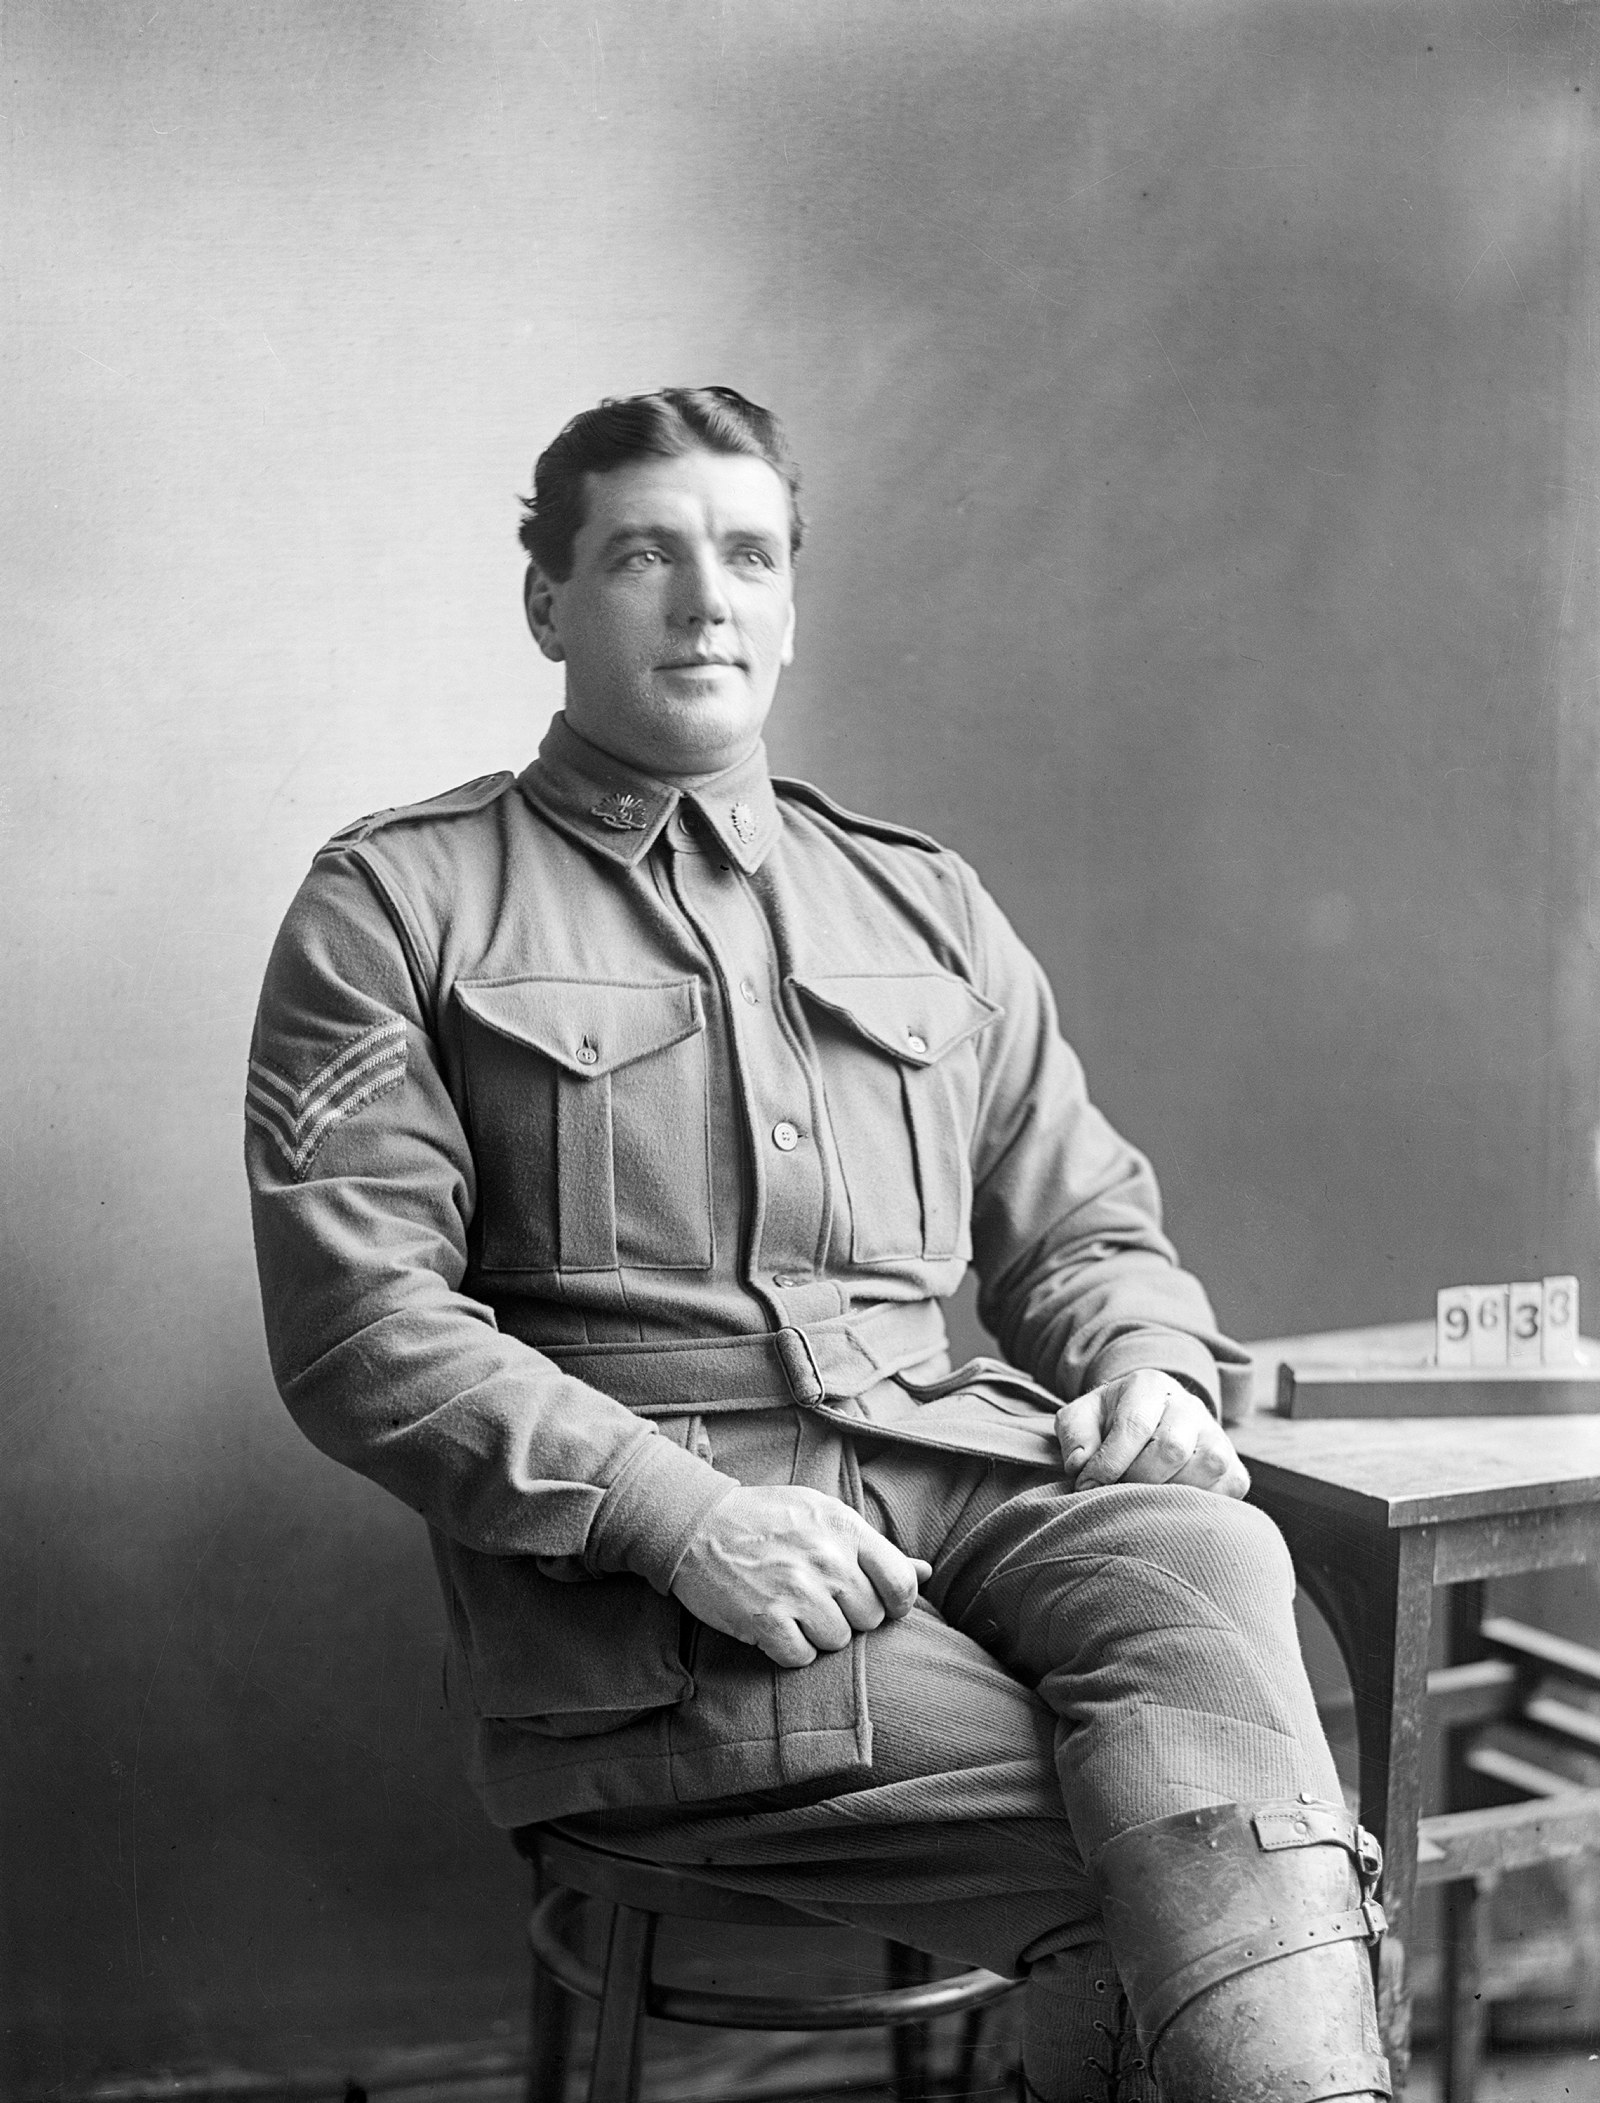 Black and white illustration of a seated man in uniform.